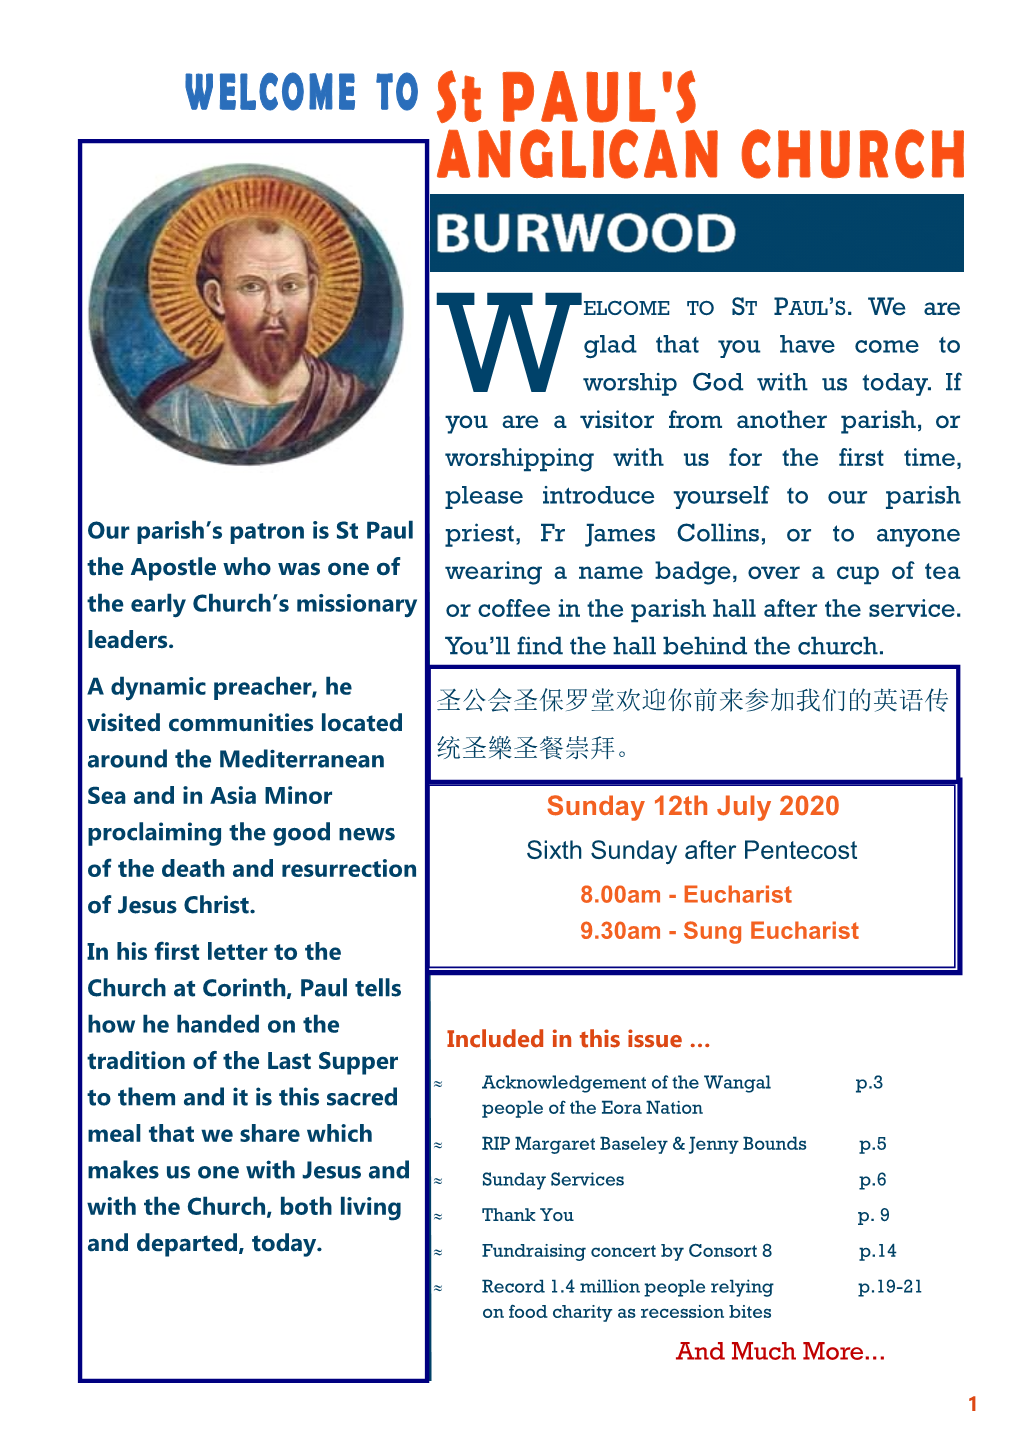 Sunday 12Th July 2020 Proclaiming the Good News Sixth Sunday After Pentecost of the Death and Resurrection of Jesus Christ